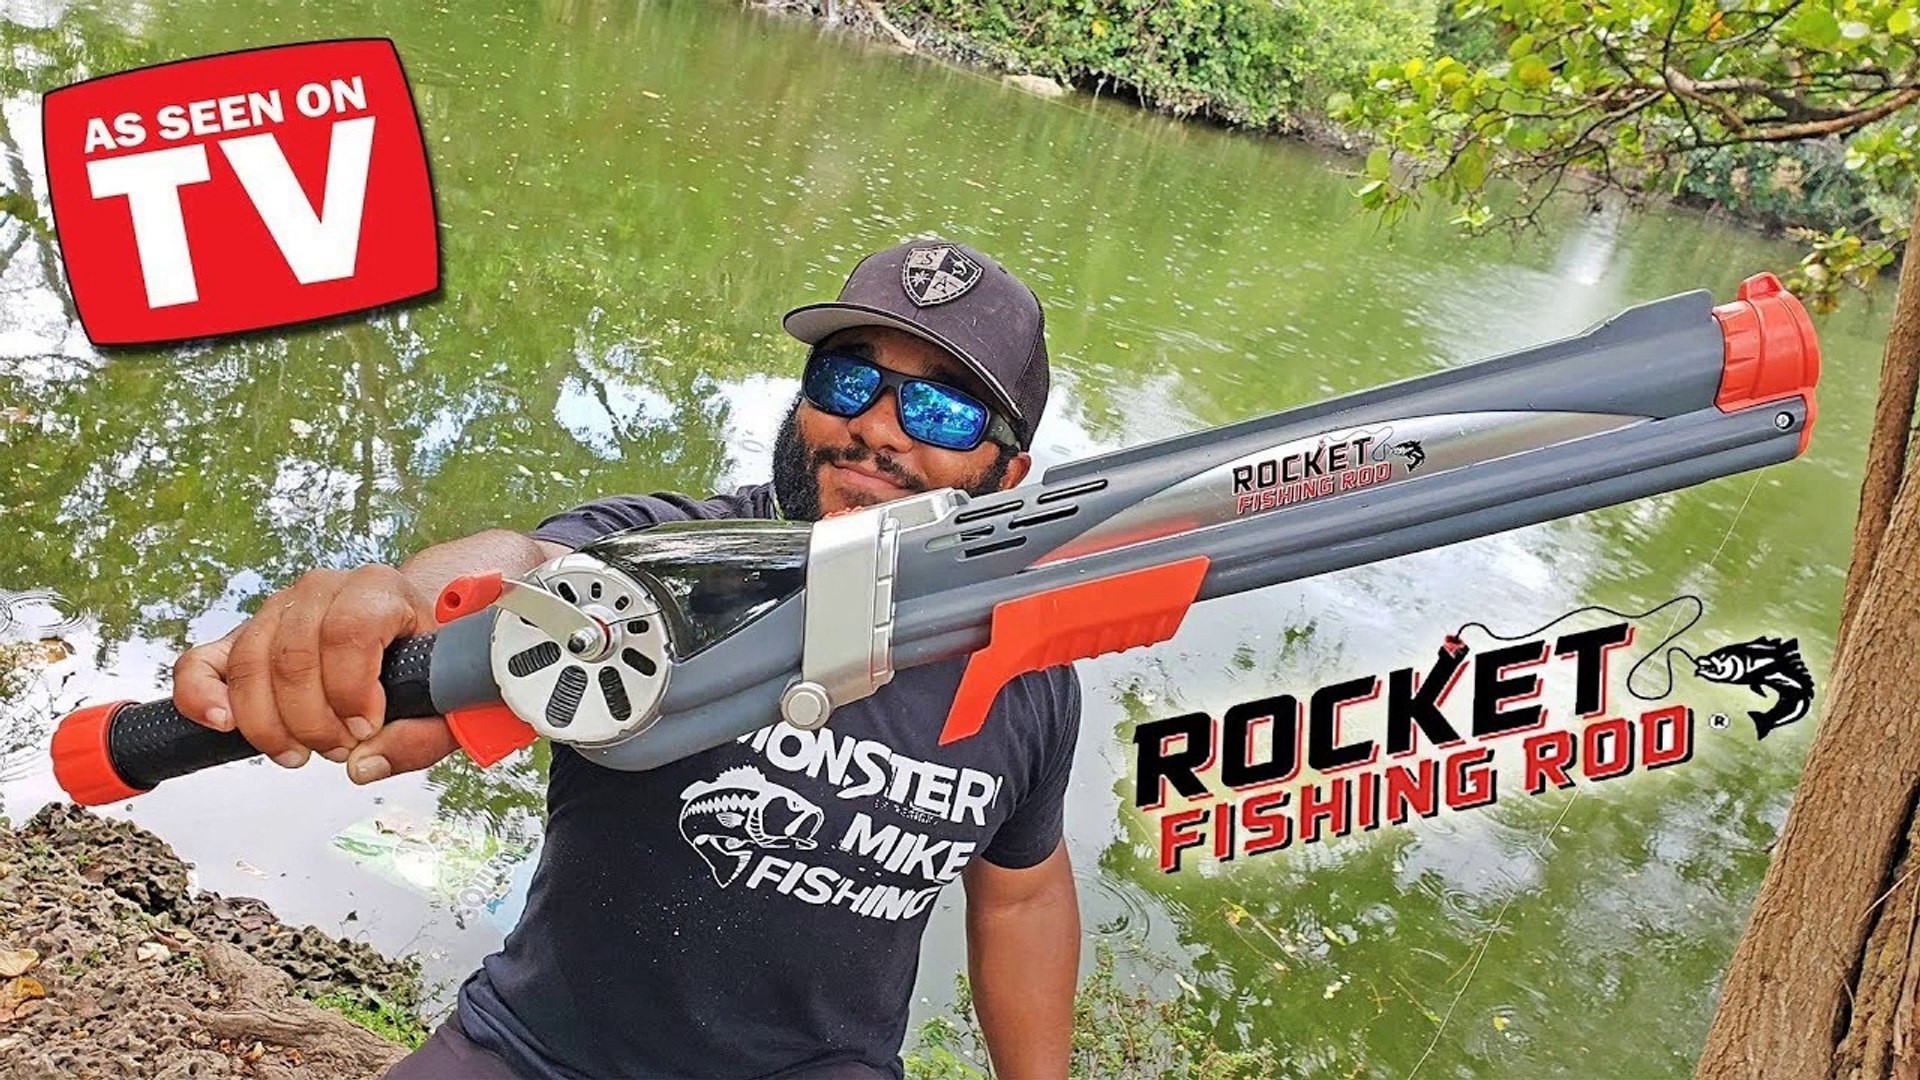 ROCKET FISHING ROD Catches POND MONSTERS! - video